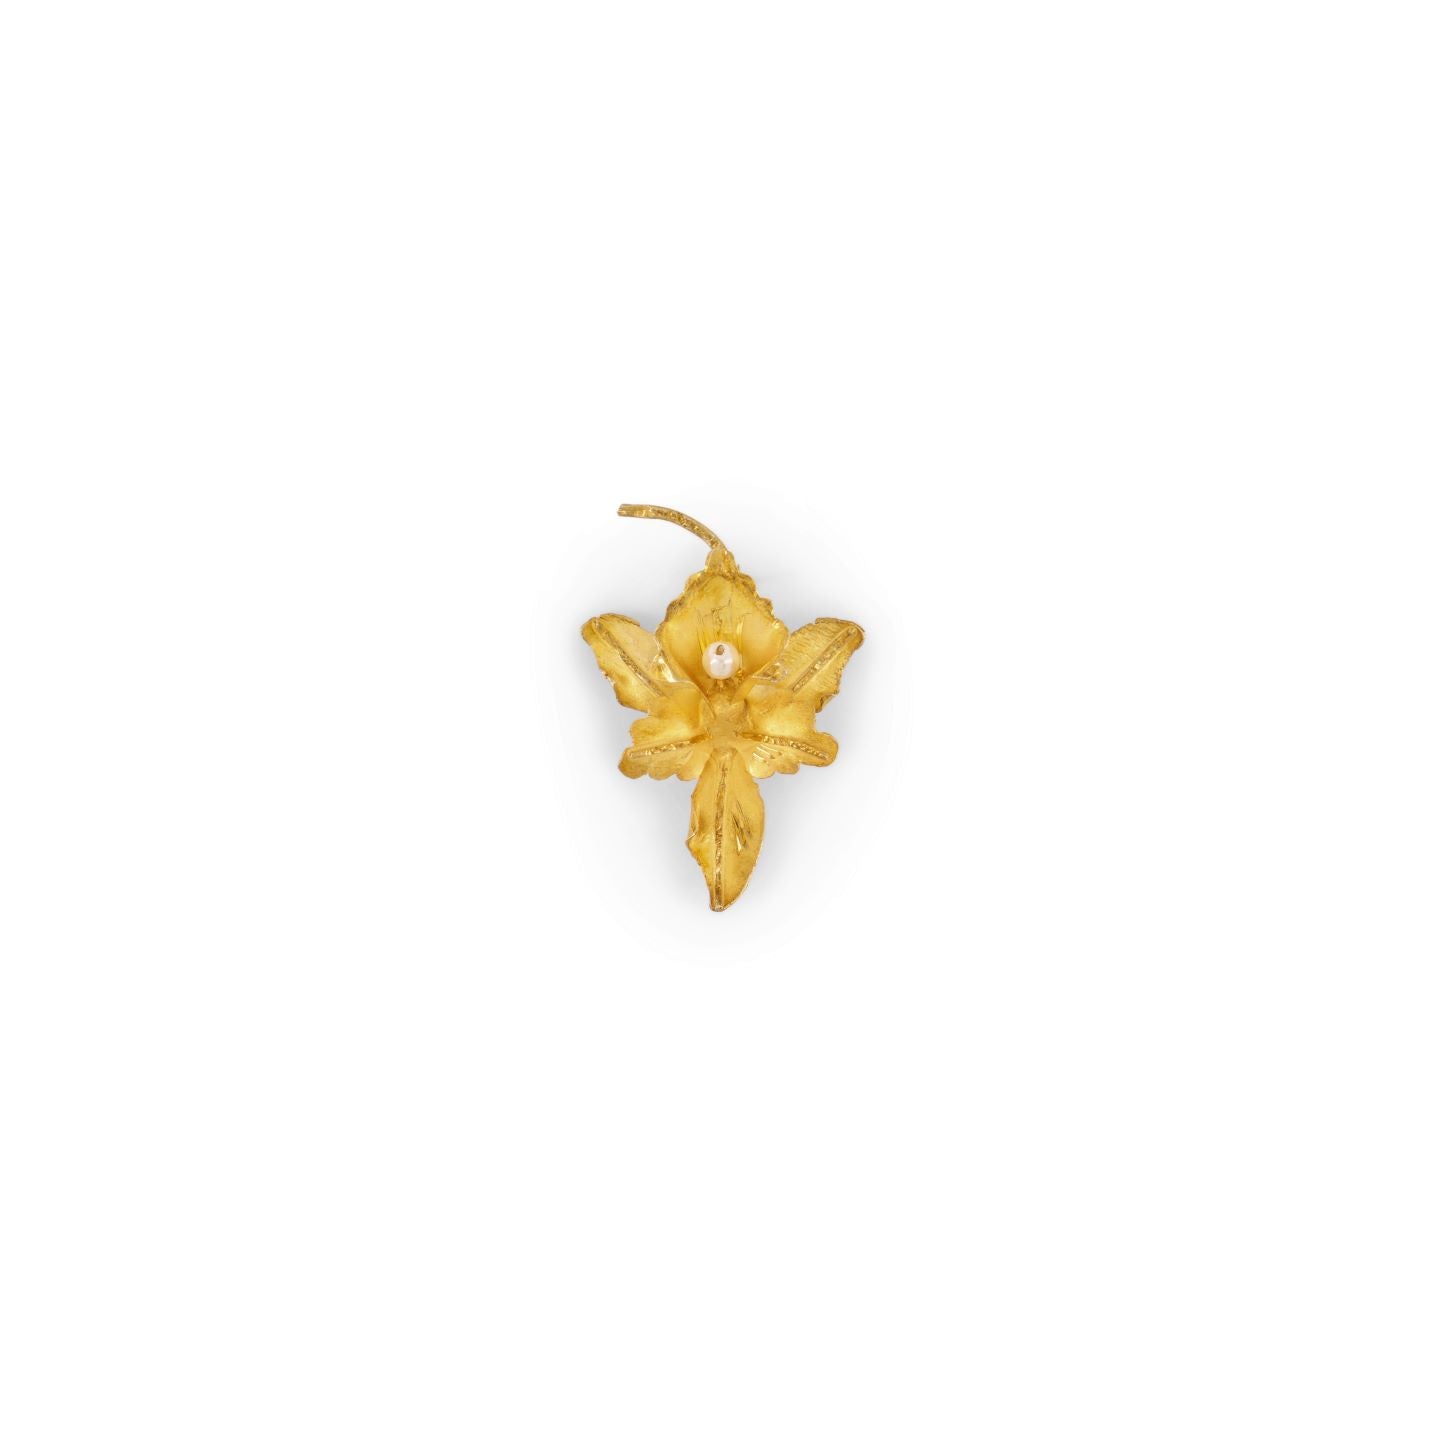 Vintage gold-plated foliate pin brooch with faux pearl